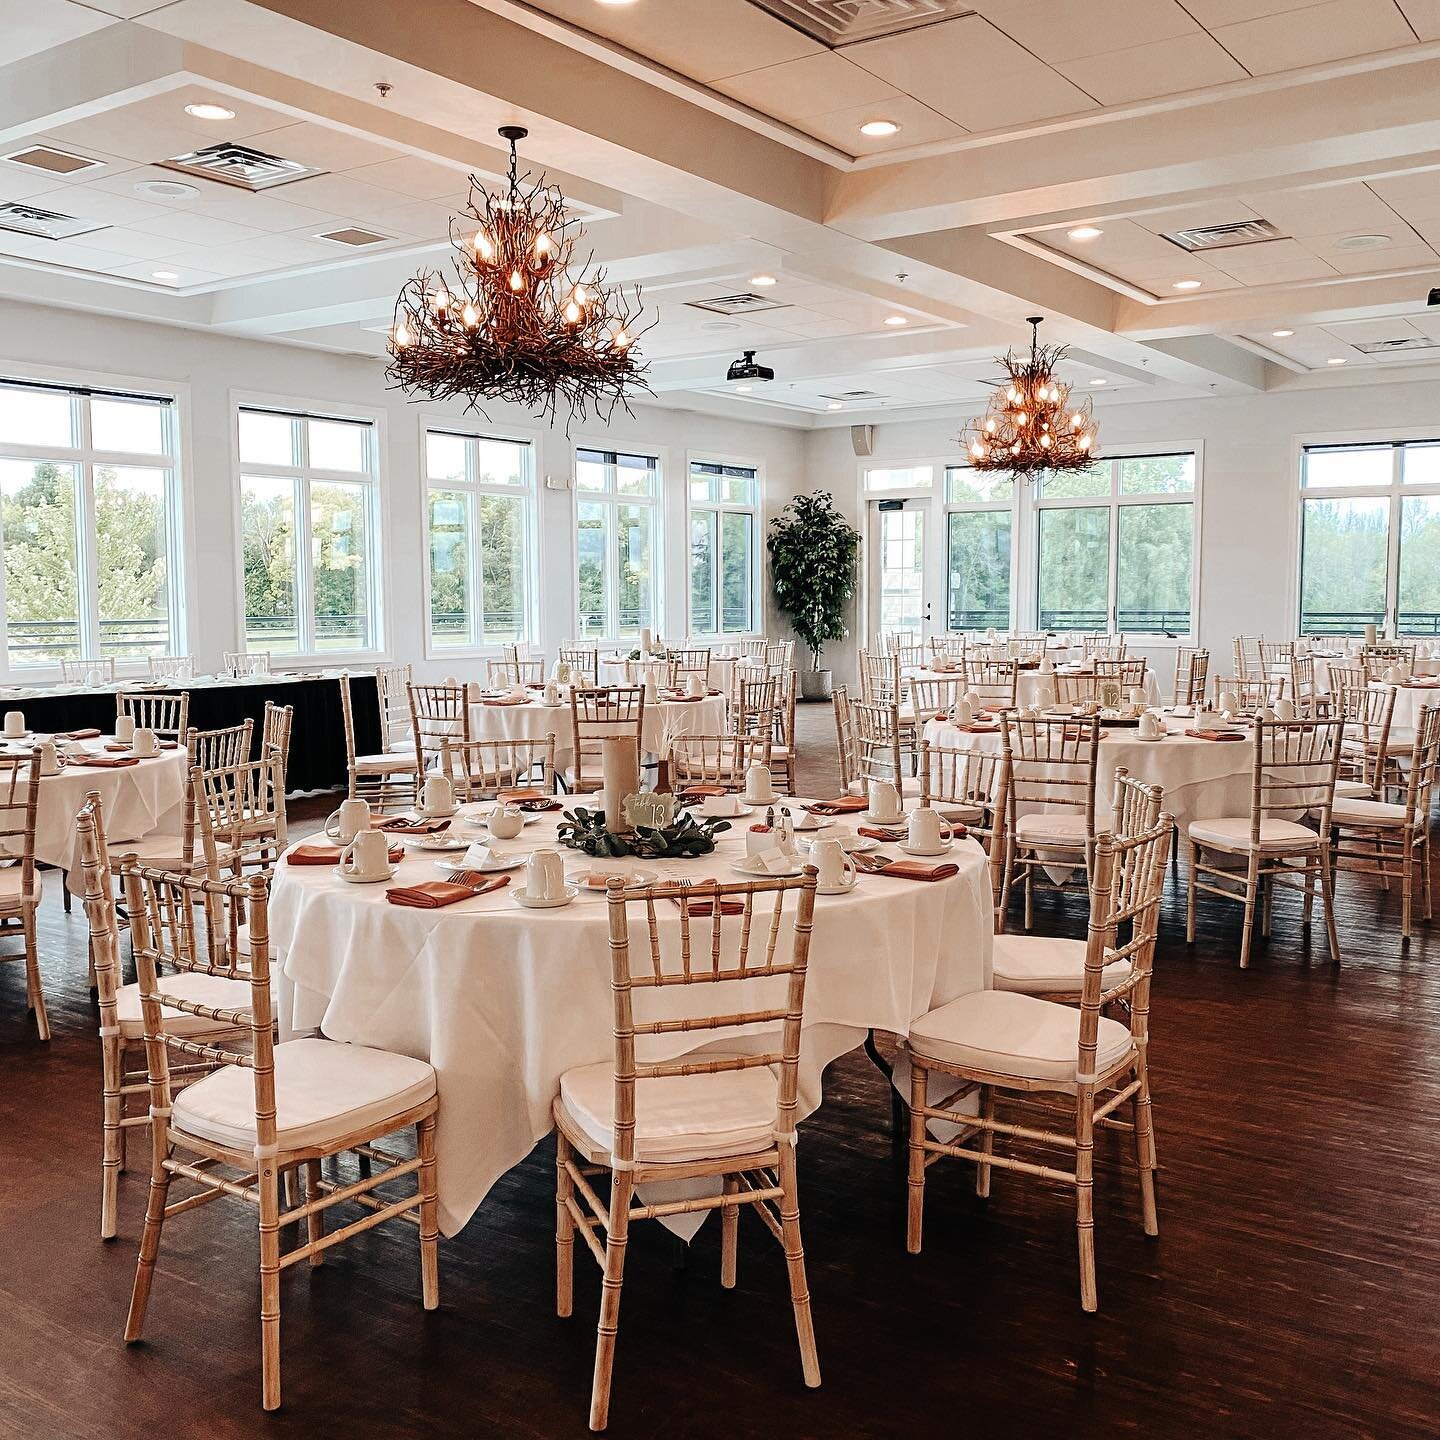 Our chiavari chairs look absolutely stunning in this gorgeous venue 😍 Give Sara from Whispering Springs a call if this is the elegant, clean design you&rsquo;d love for your wedding. 

And head over to our website to learn more about how you can ren